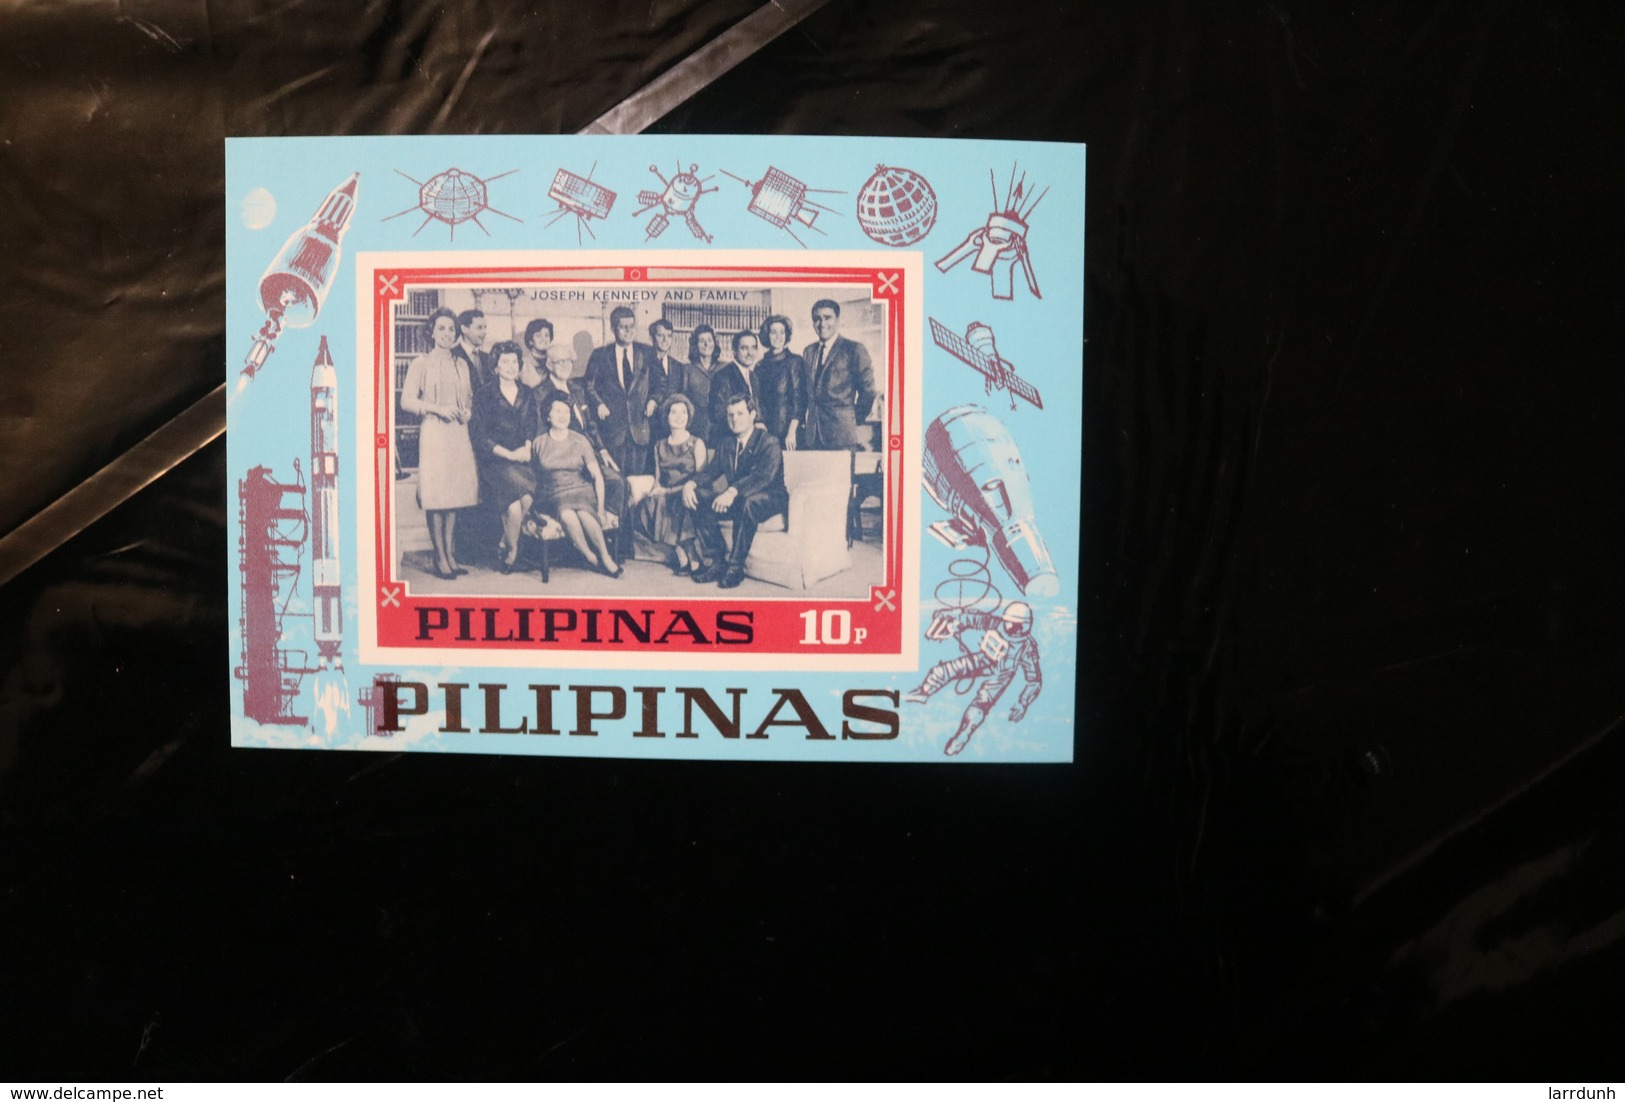 Philippines JFK Family Kennedy Space Souvenir Sheet Block Unlisted MNH 1968 A04s - Philippines